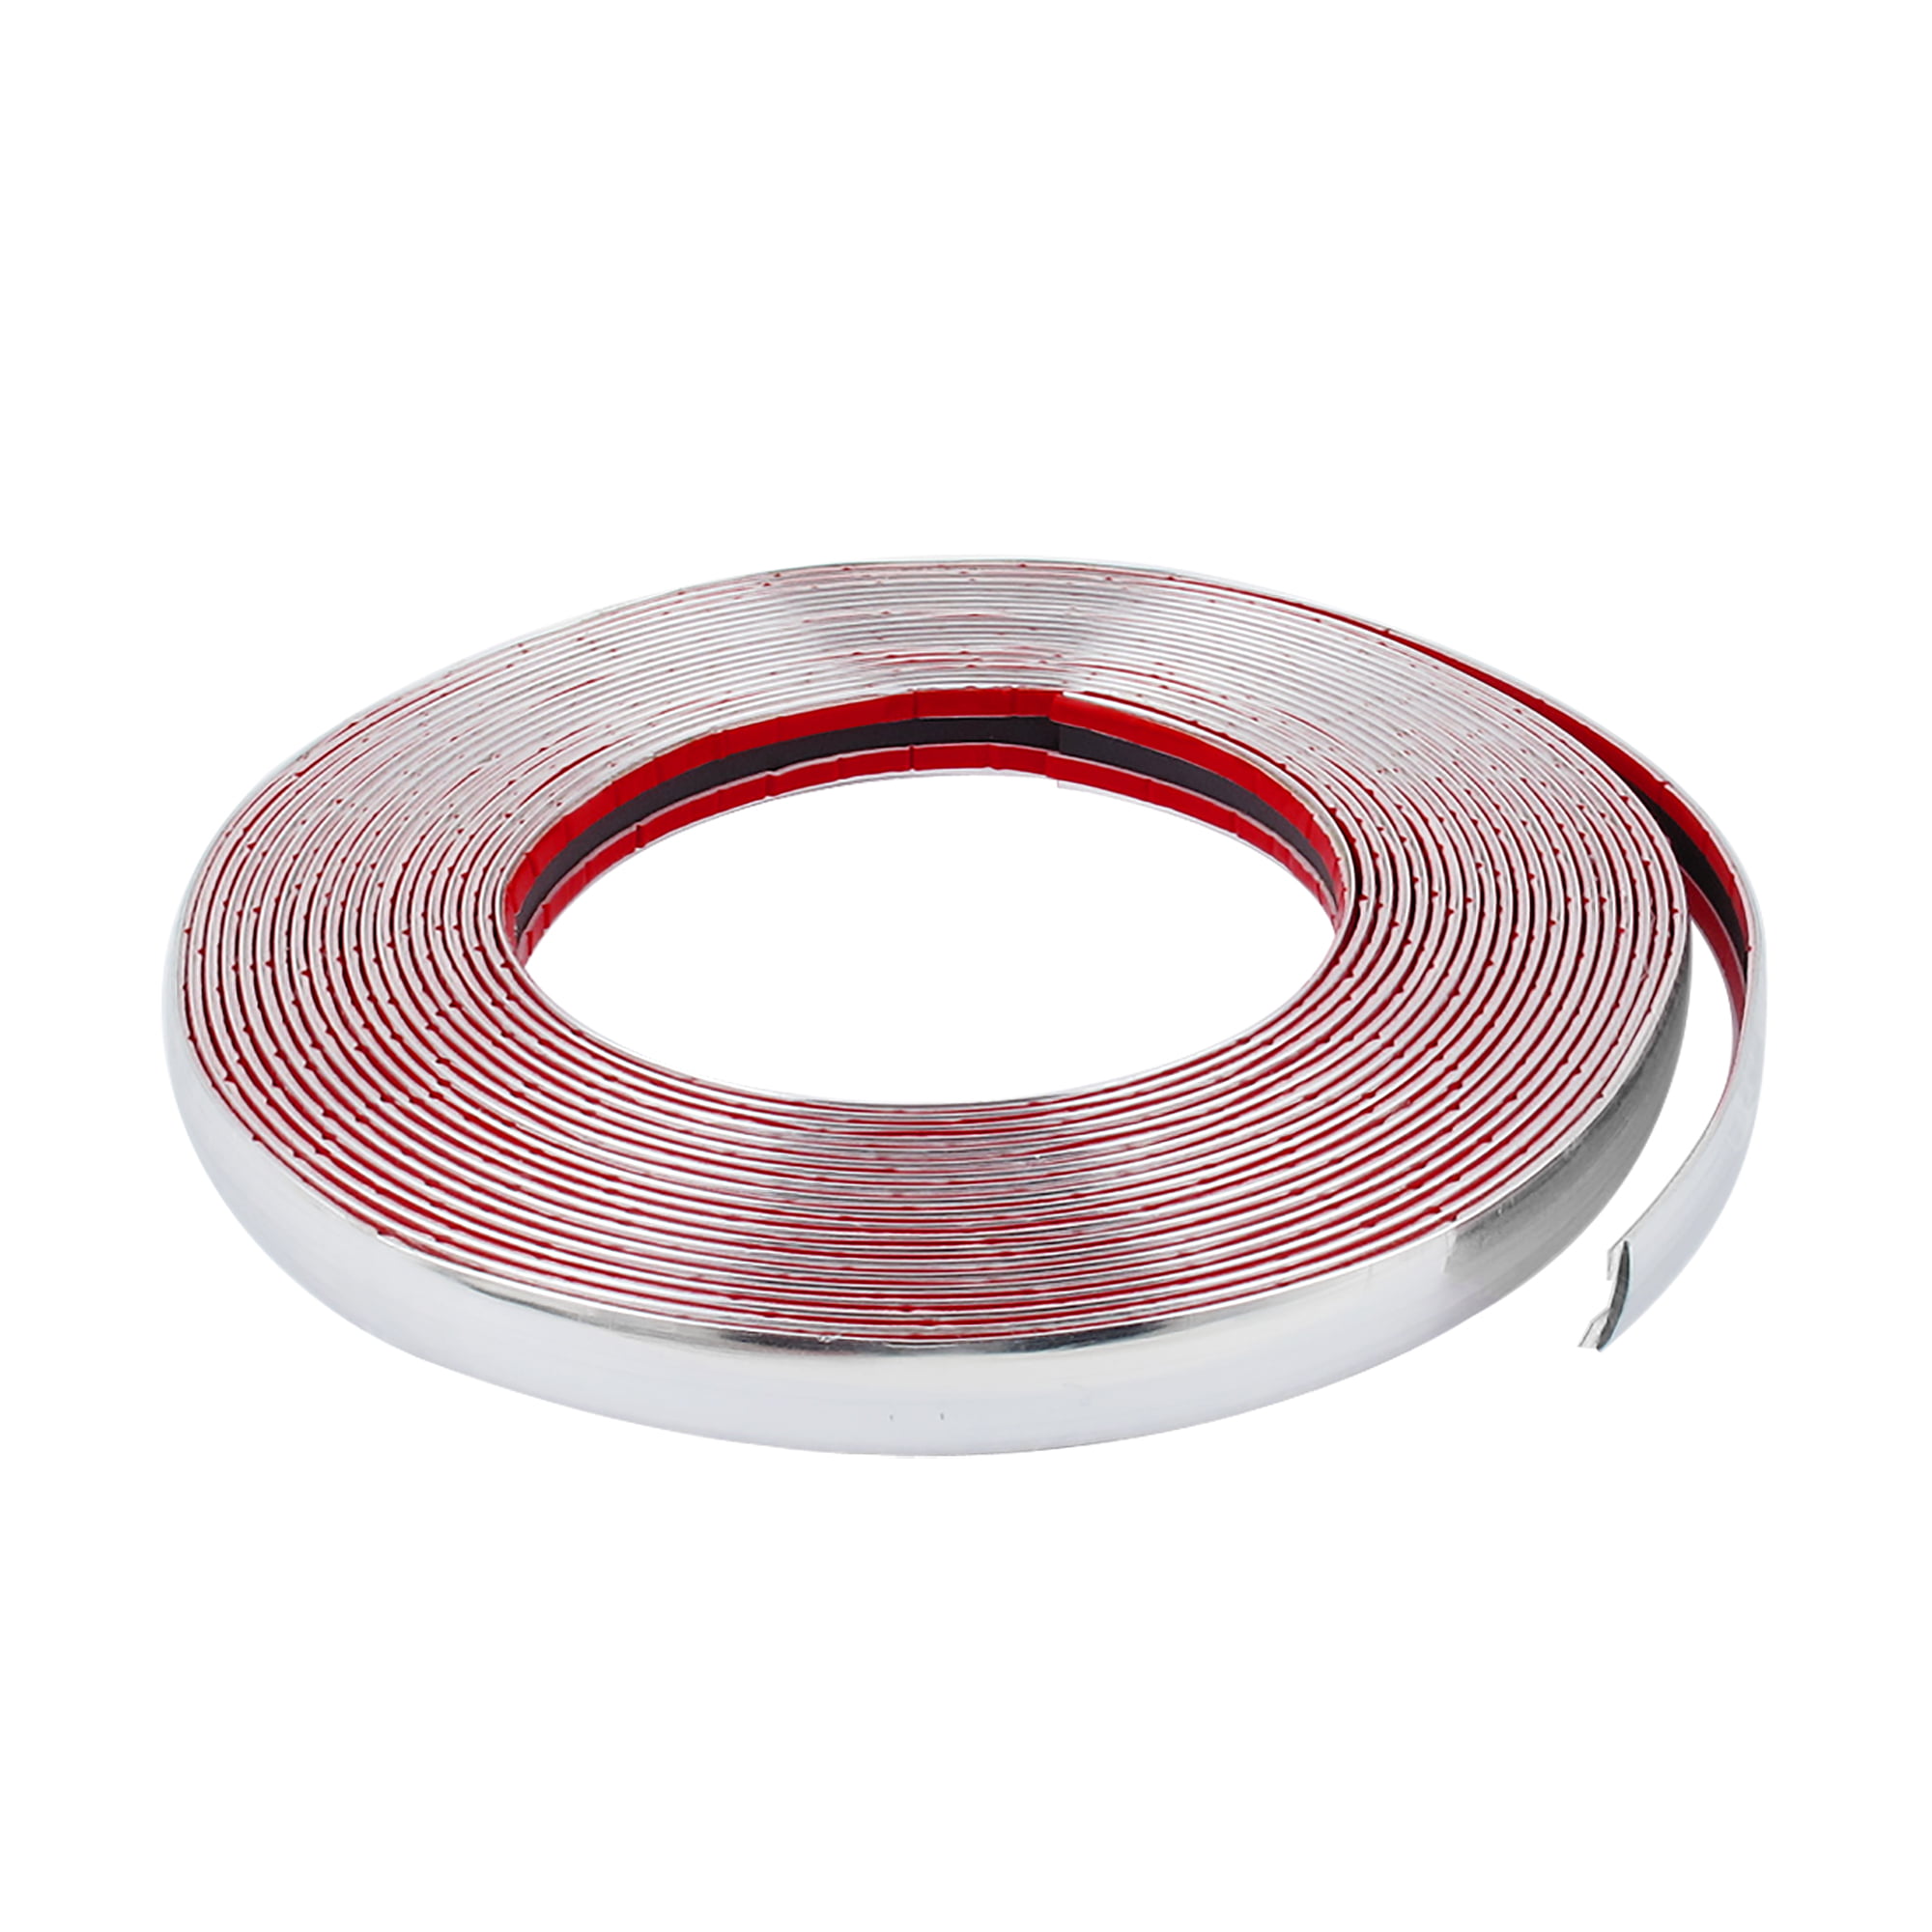 Details about  / 2m x 30mm Car Styling CHROME TRIM MOLDING STRIP Self Adhesive Exterior Interior